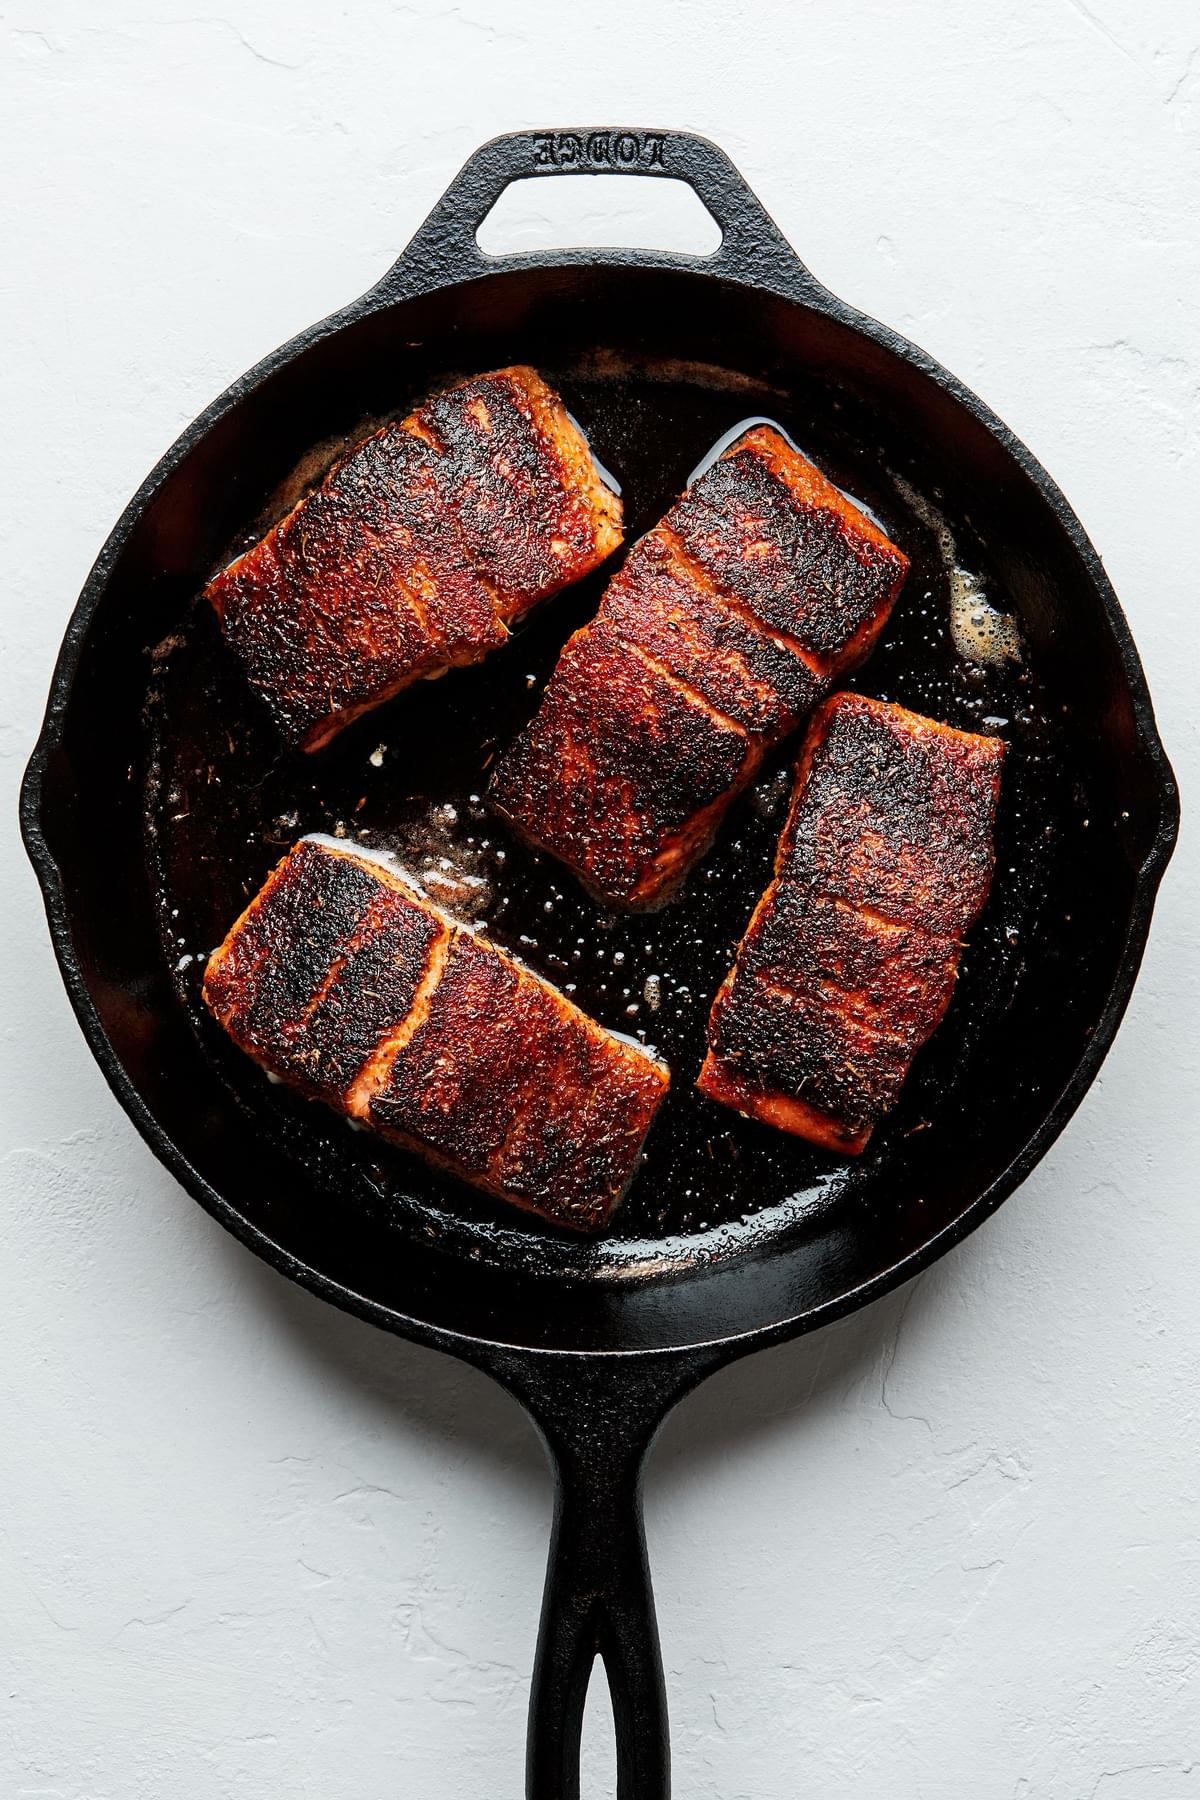 4 blackened salmon filets being cooked in olive oil and melted butter in a cast iron skillet